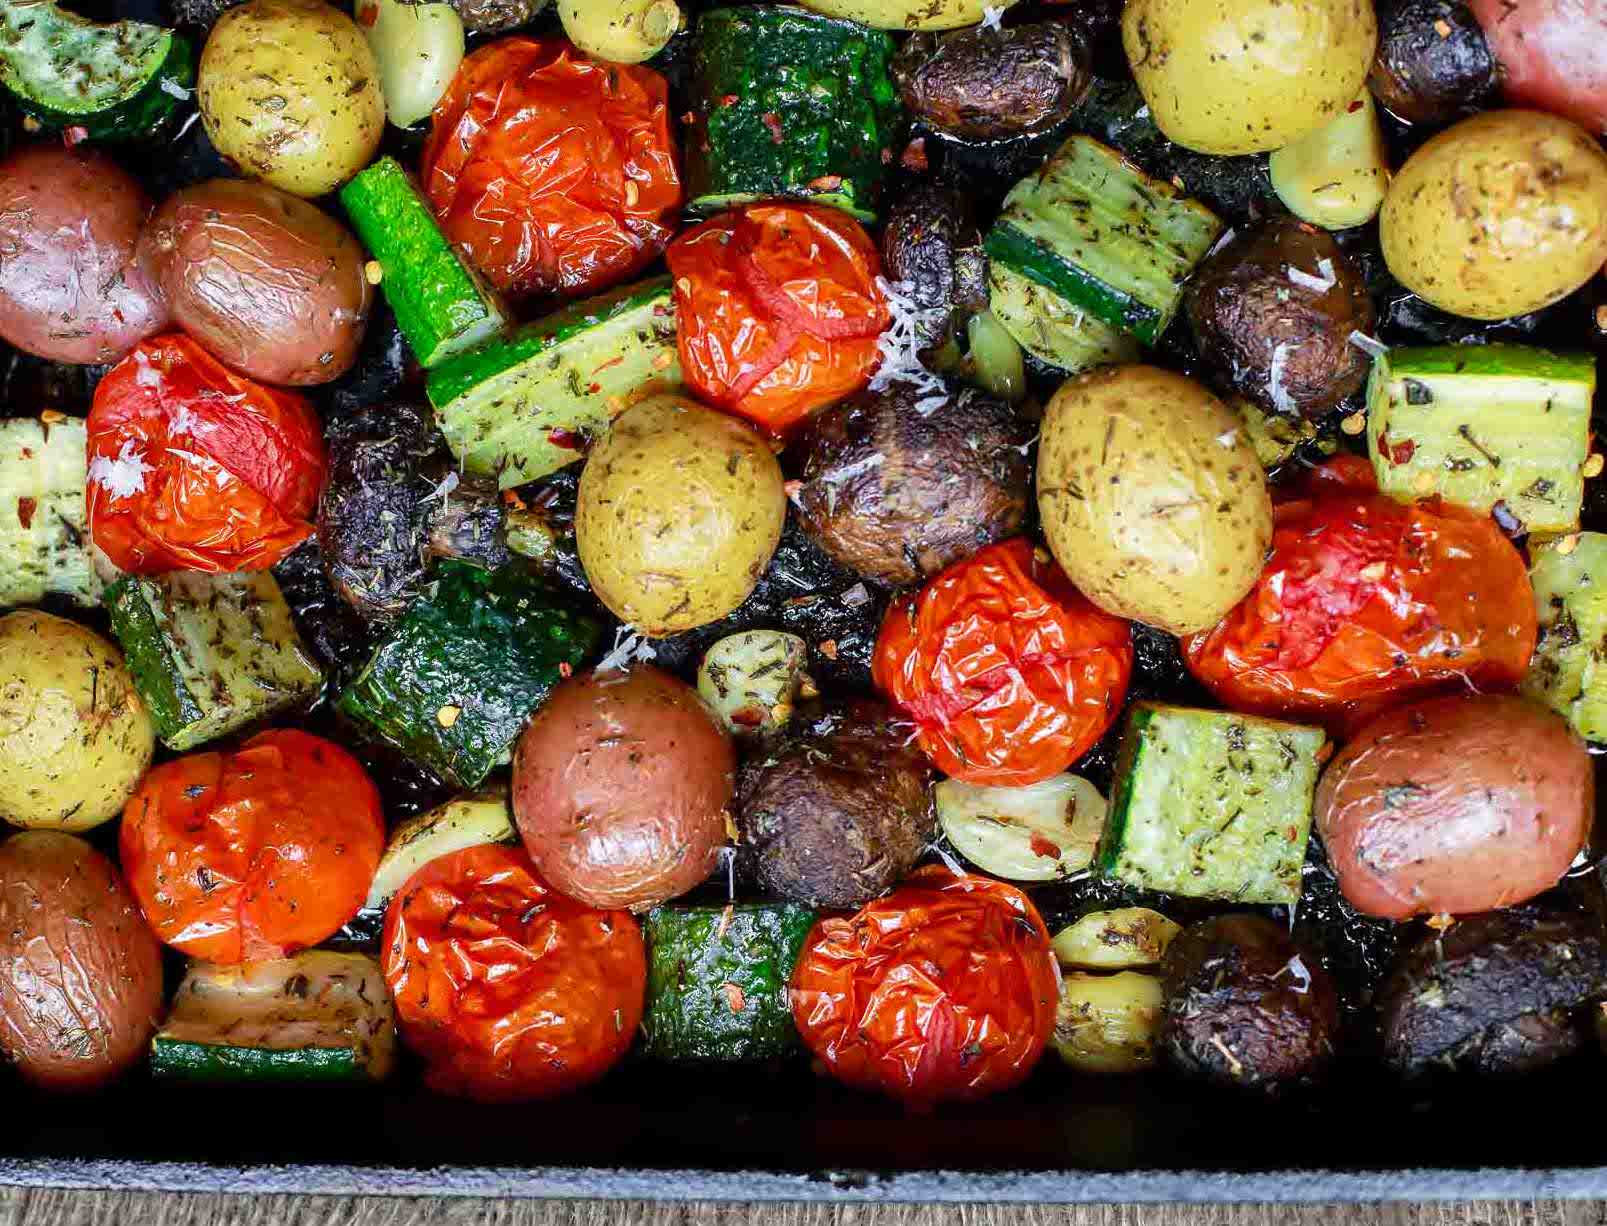 45 Minute Oven-Roasted Vegetables